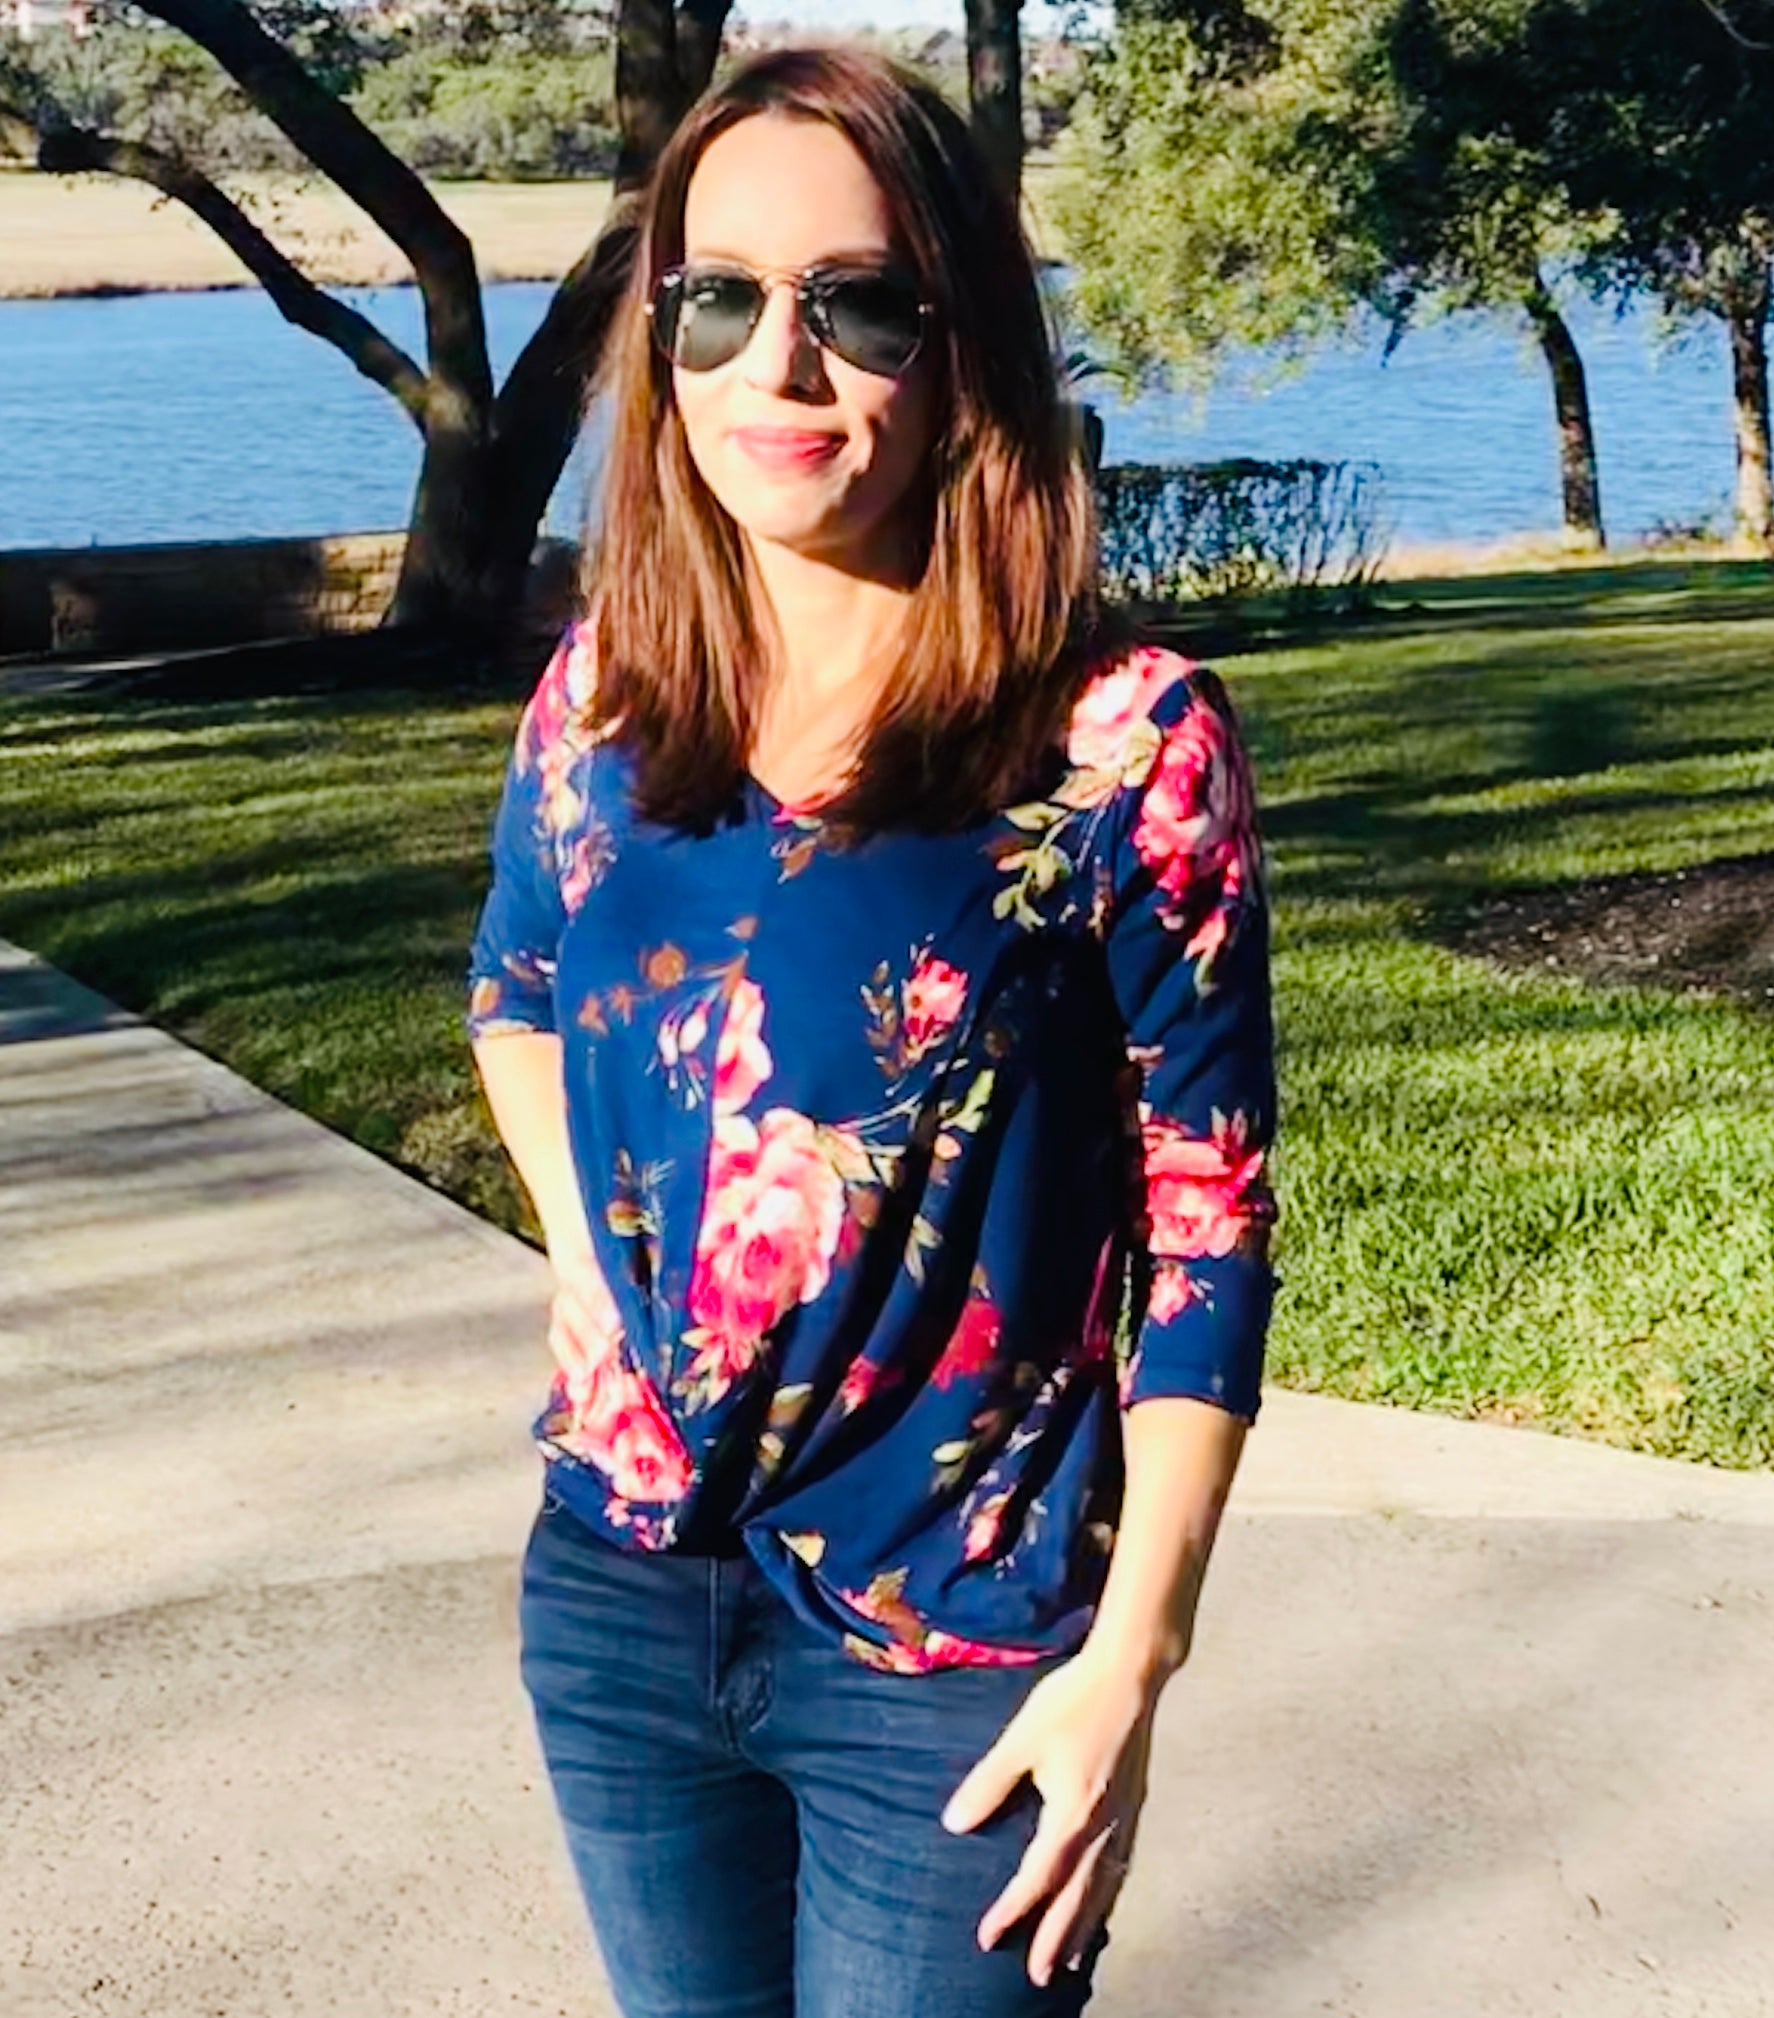 Navy Blue Floral Knot Top